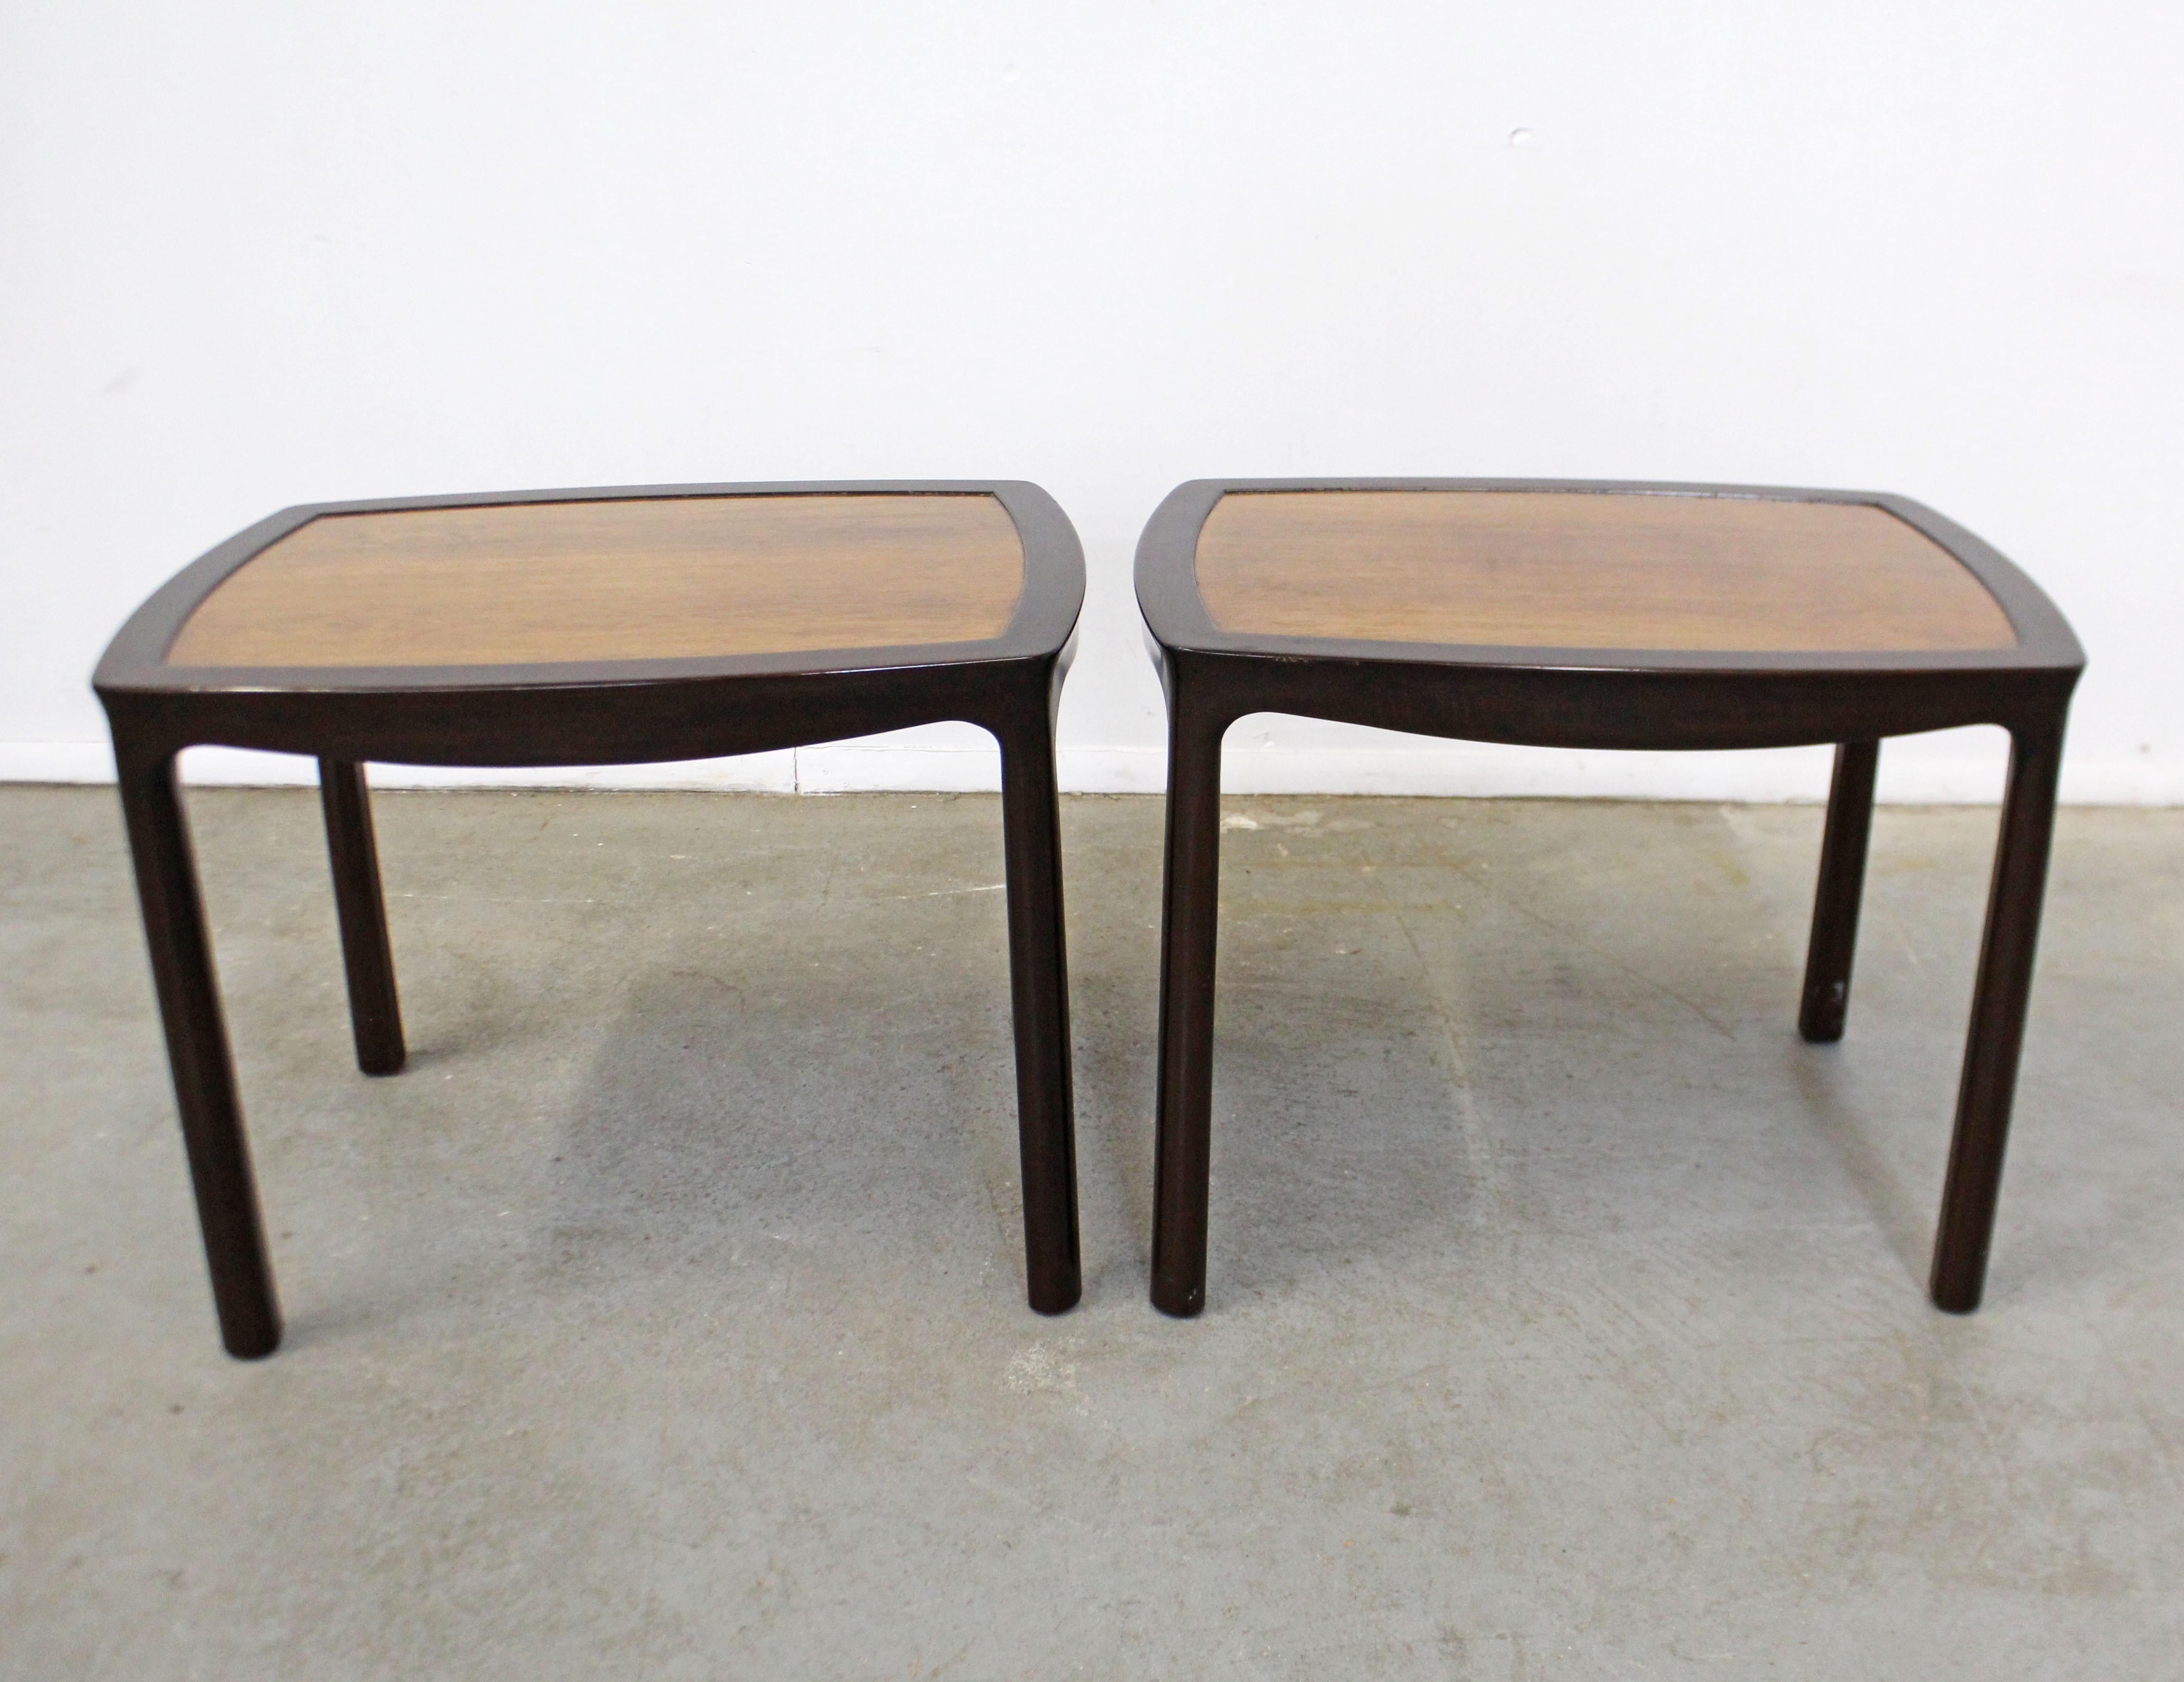 Offered is a pair of midcentury Asian Modern end tables, designed by Edward Wormley for Dunbar. These tables have ebonized mahogany bases and rosewood tops. They're in good vintage condition with some age wear including surface scratches/chips,